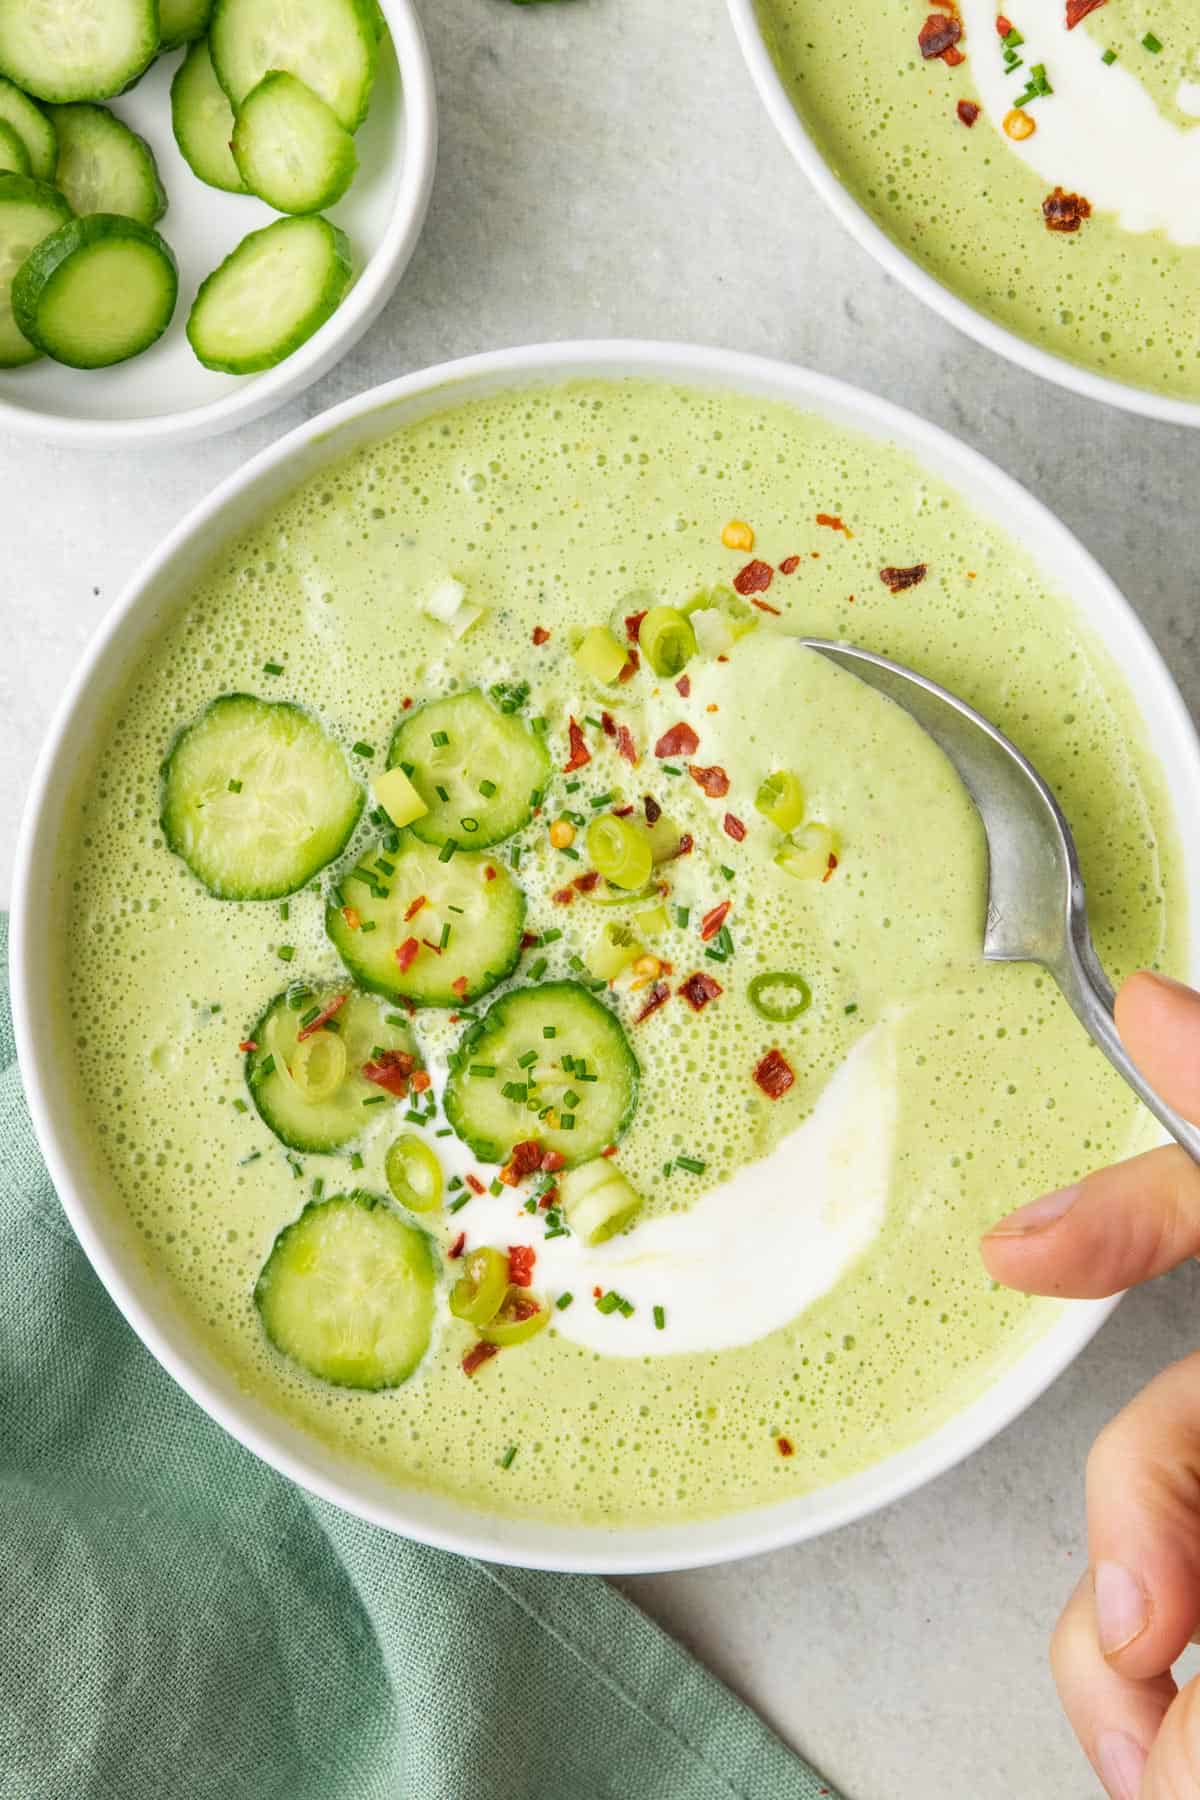 Cucumber gazpacho garnished with cucumber slices, yogurt, red pepper flakes, and green onions with a spoon dipping into the bowl.